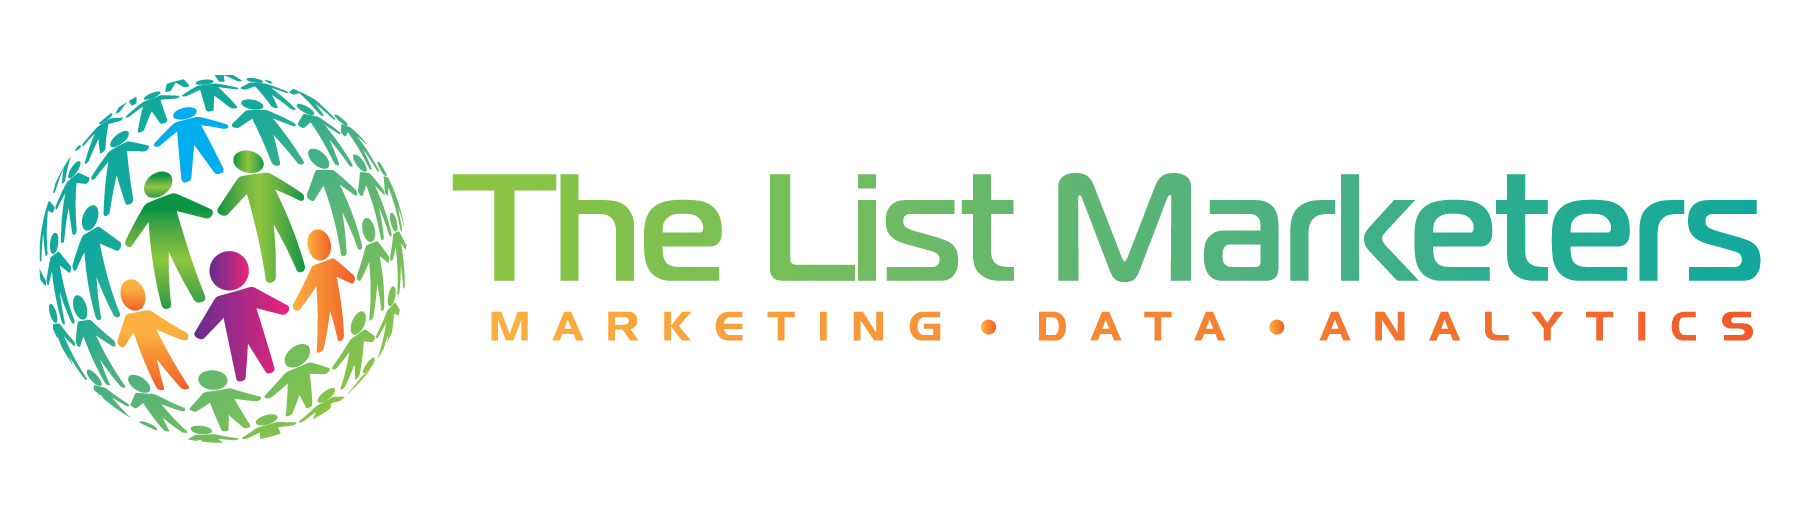 The List Marketers